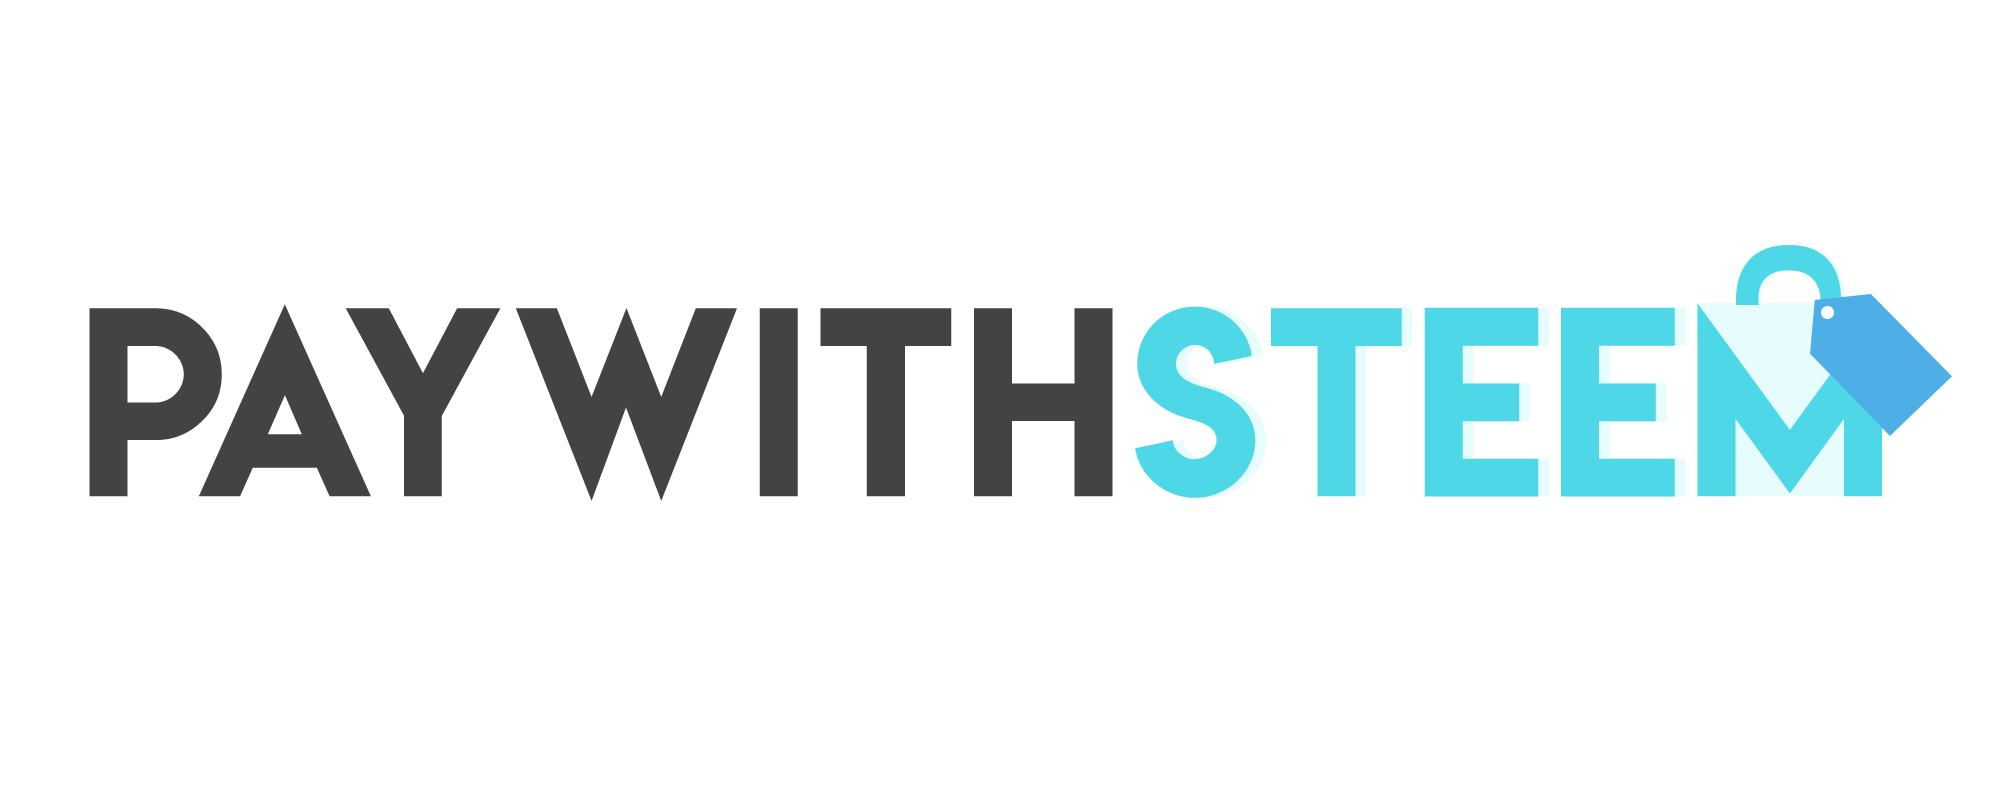 paywithsteem_Logo.png